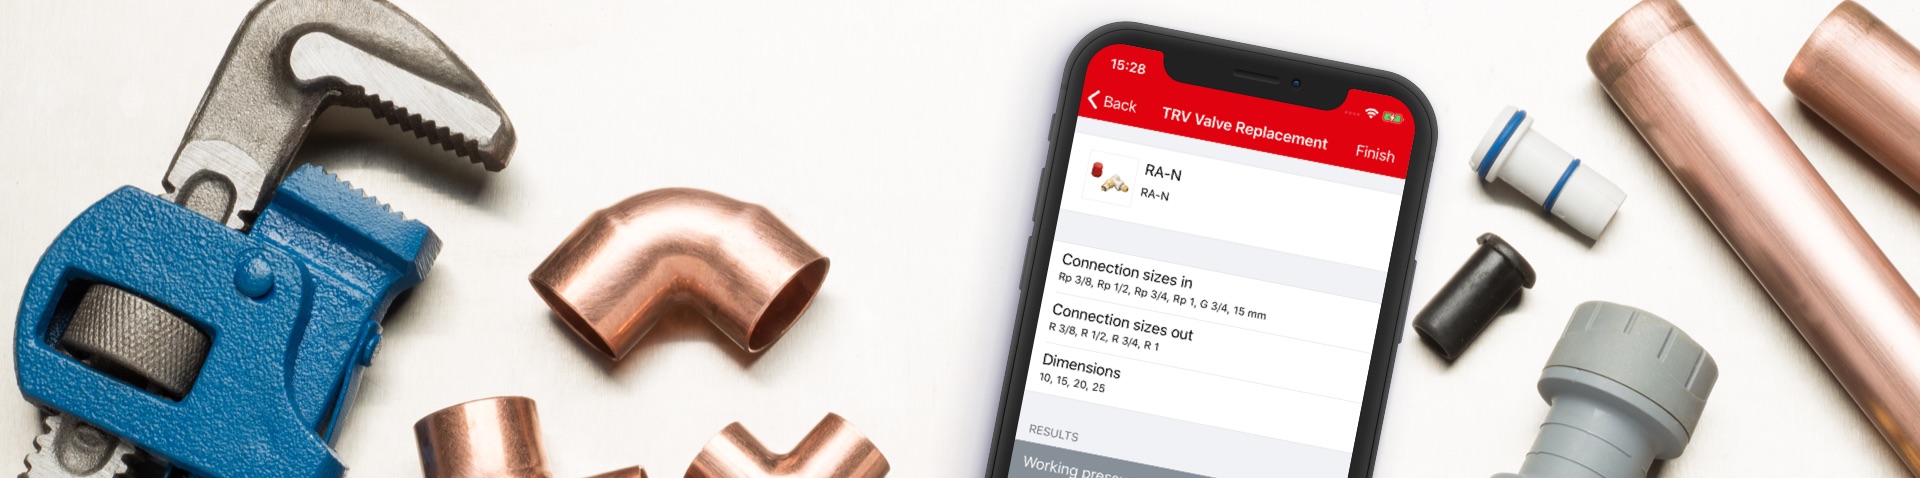 Download the Danfoss Installer App for Android and iOS